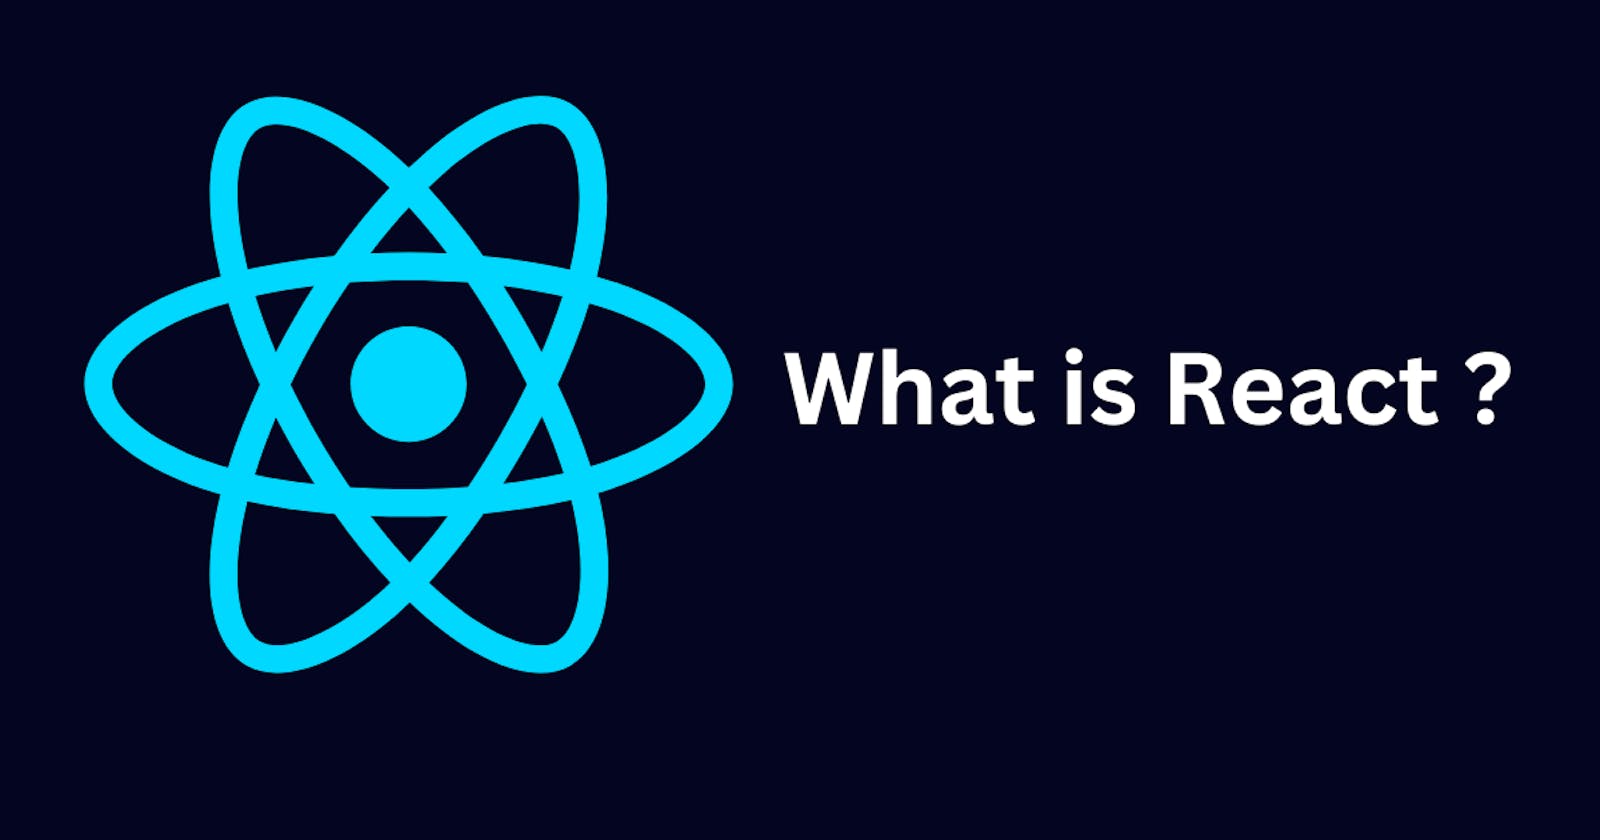 Let's Get Started with React: A Fun and In-Depth Introduction to Building Web Apps